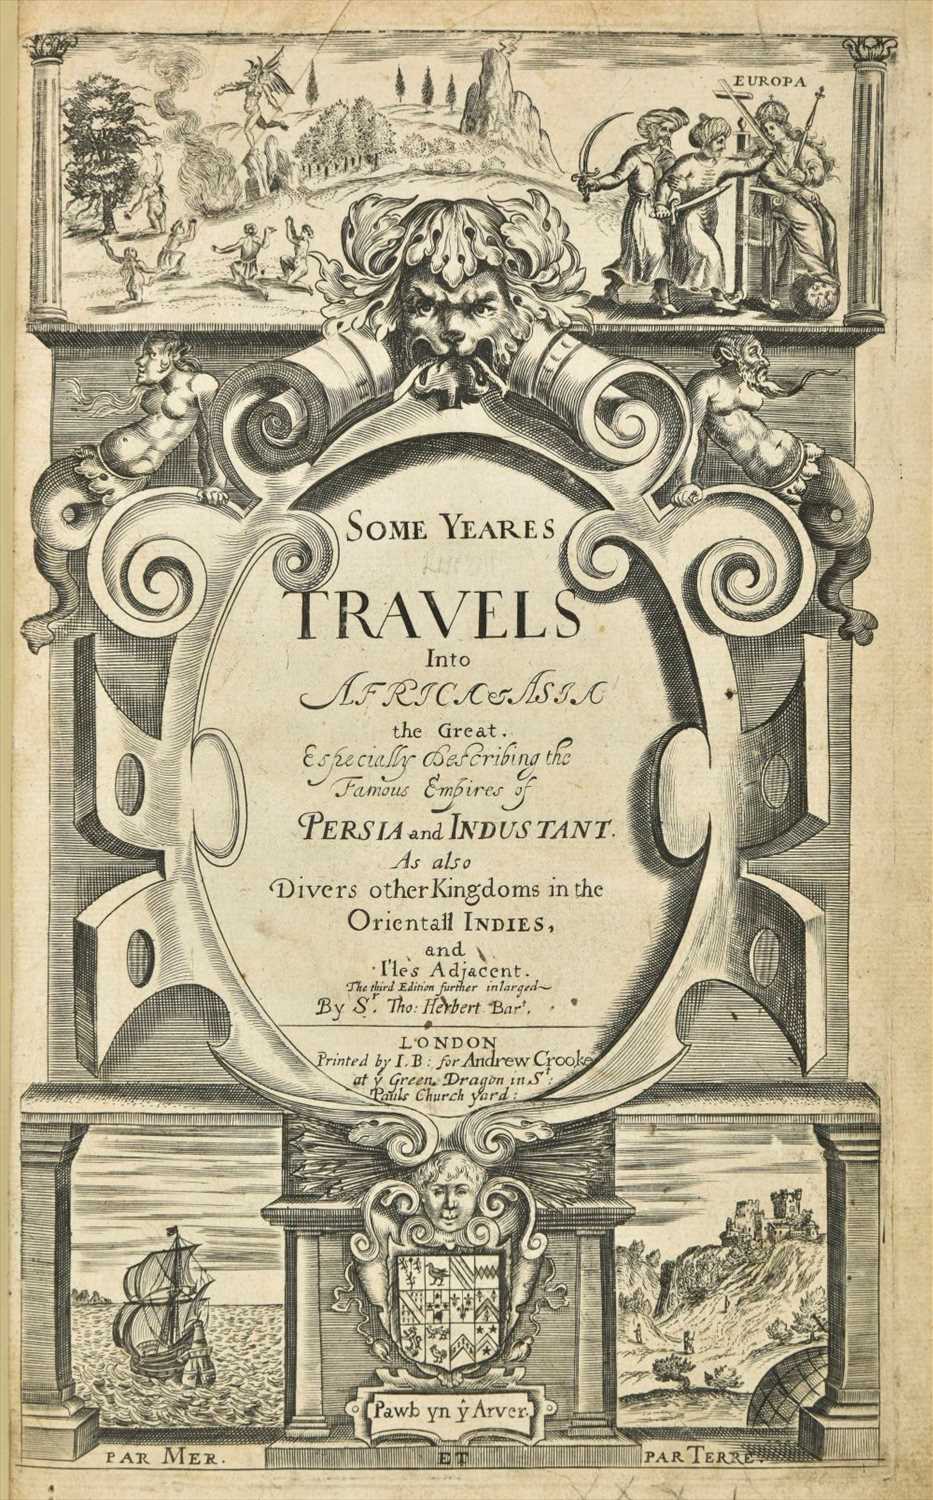 Lot 30 - Herbert (Thomas). Some Years Travels into Divers Parts of Africa and Asia the Great, 1665